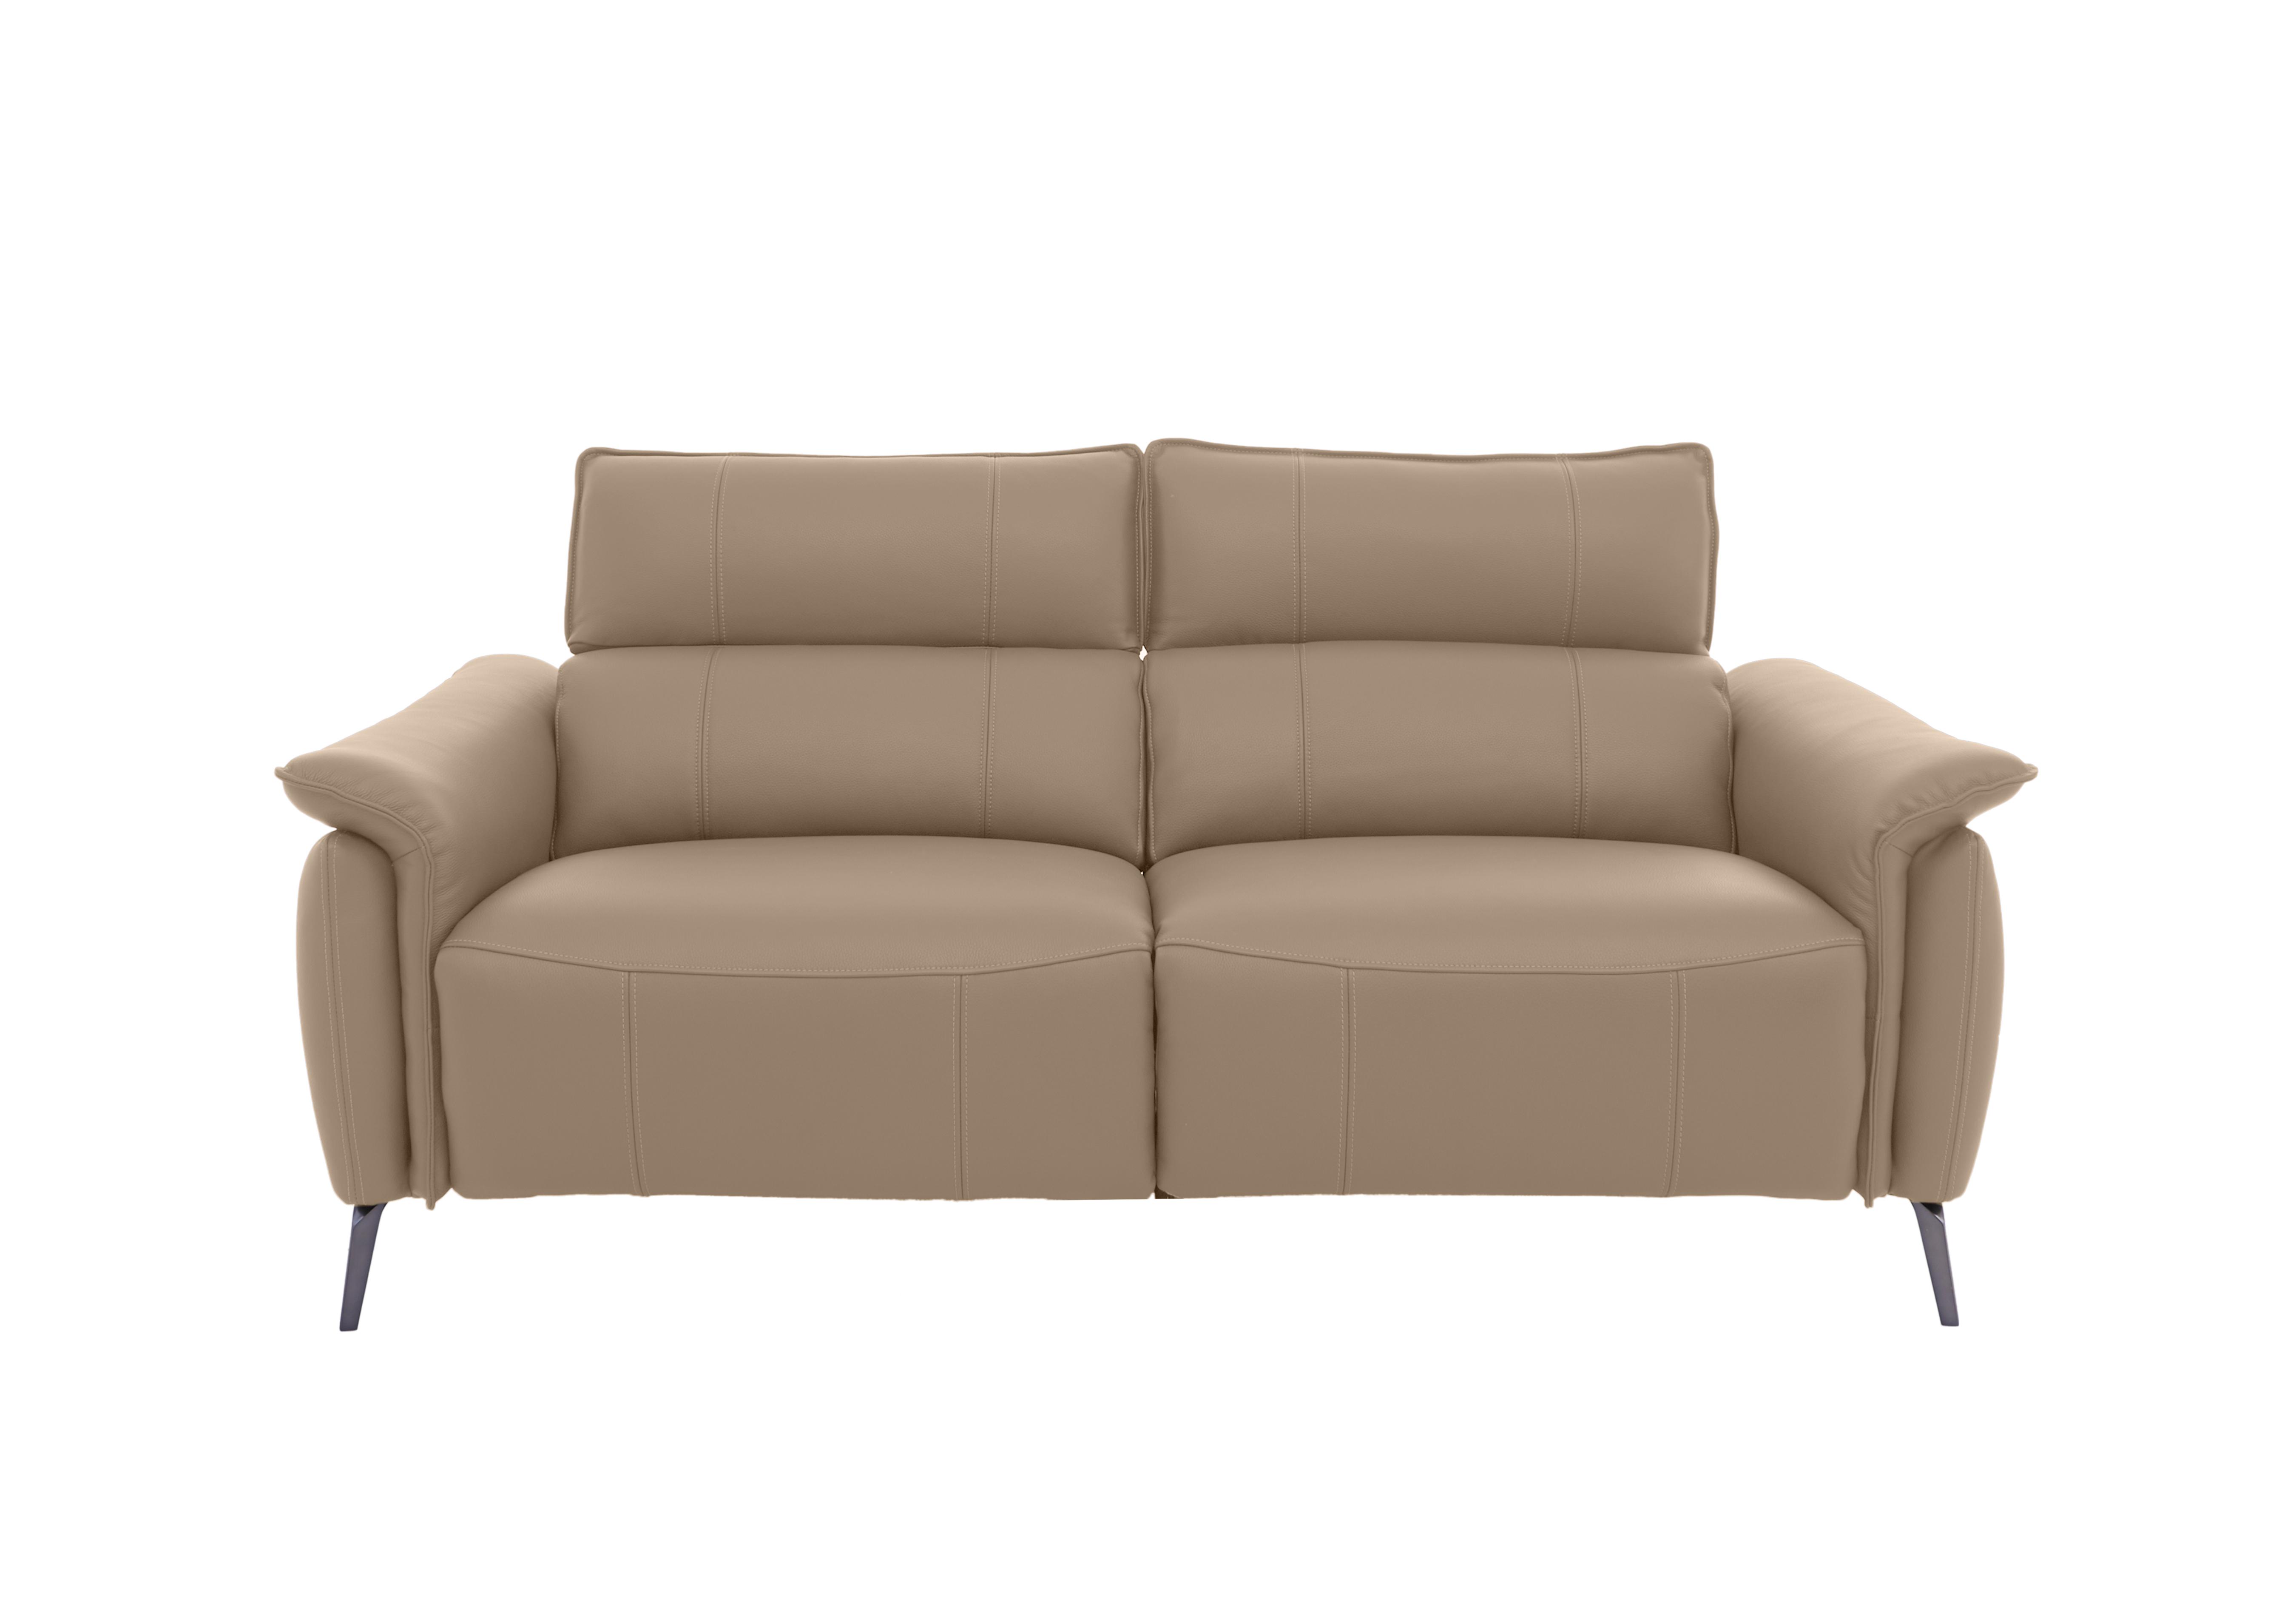 Jude 3 Seater Leather Sofa in Montana Barley Cat-60/06 on Furniture Village